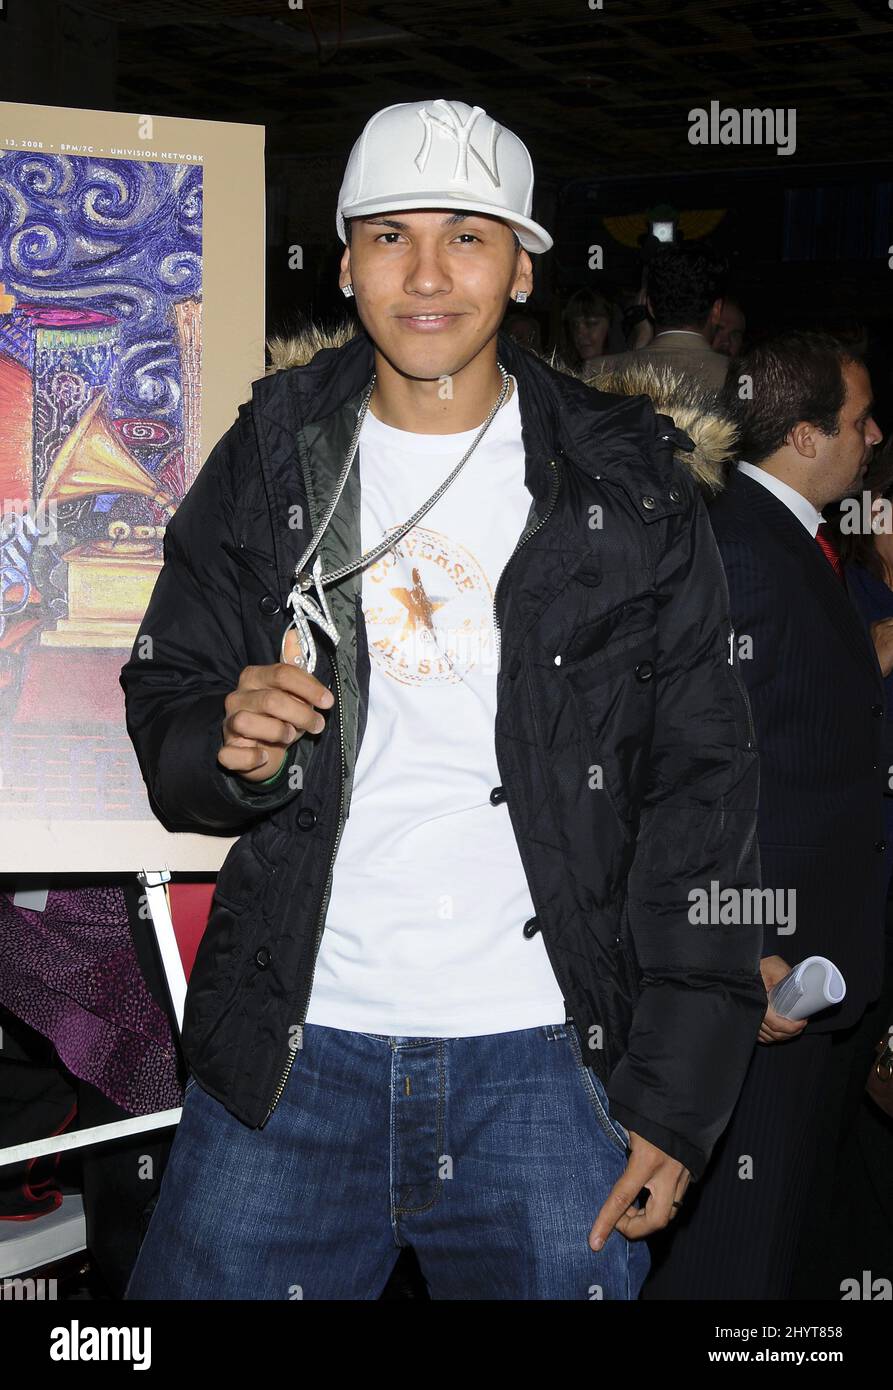 Flex attends the 9th Annual Latin GRAMMY Awards Nominations Press Conference held at the House of Blues in West Hollywood, CA. Stock Photo